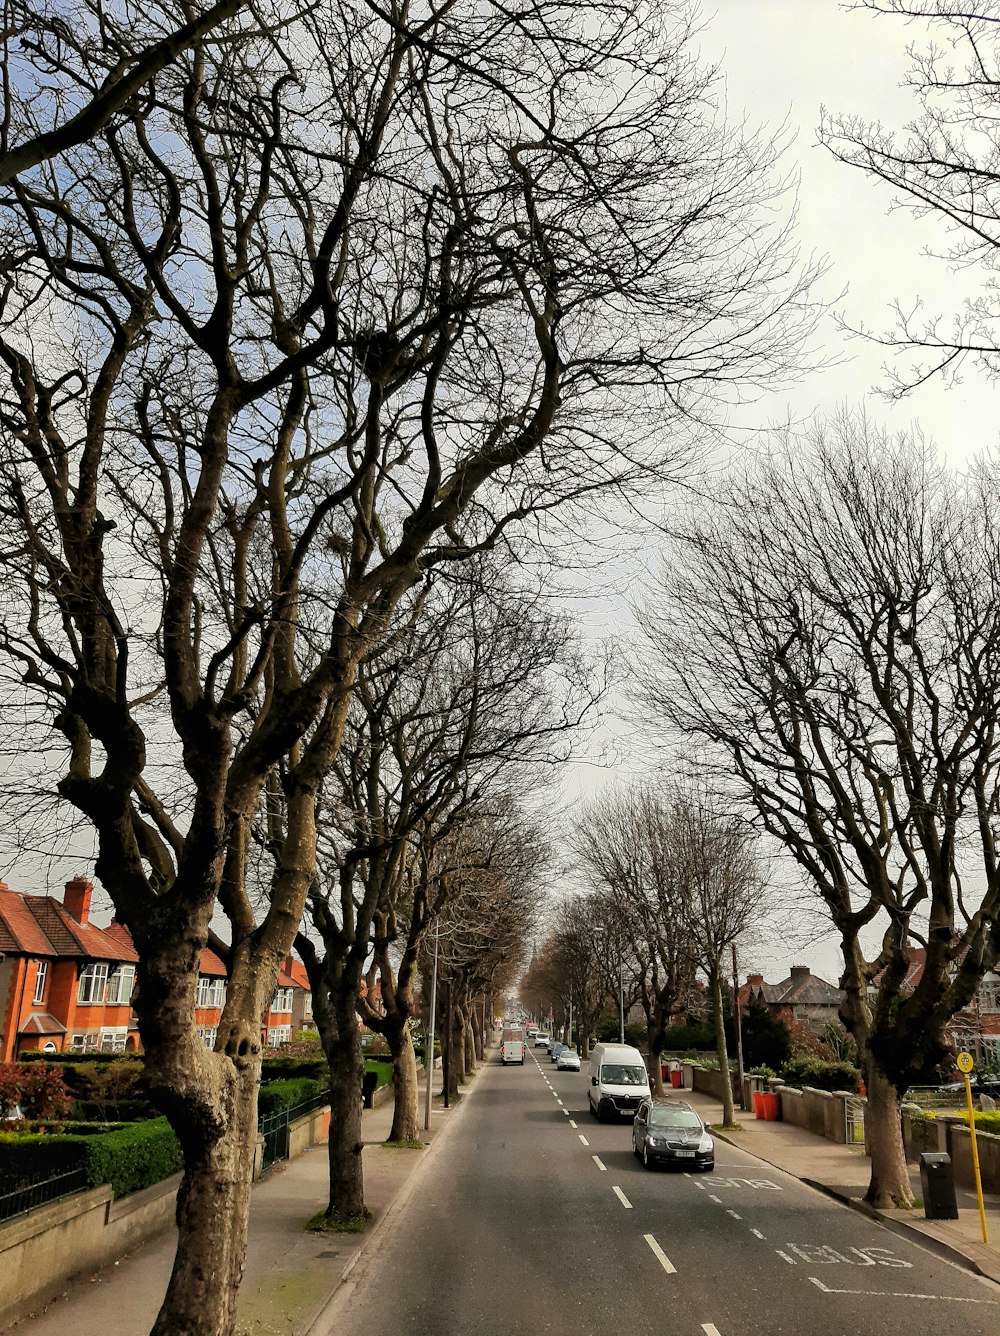 a street lined with trees and parked cars